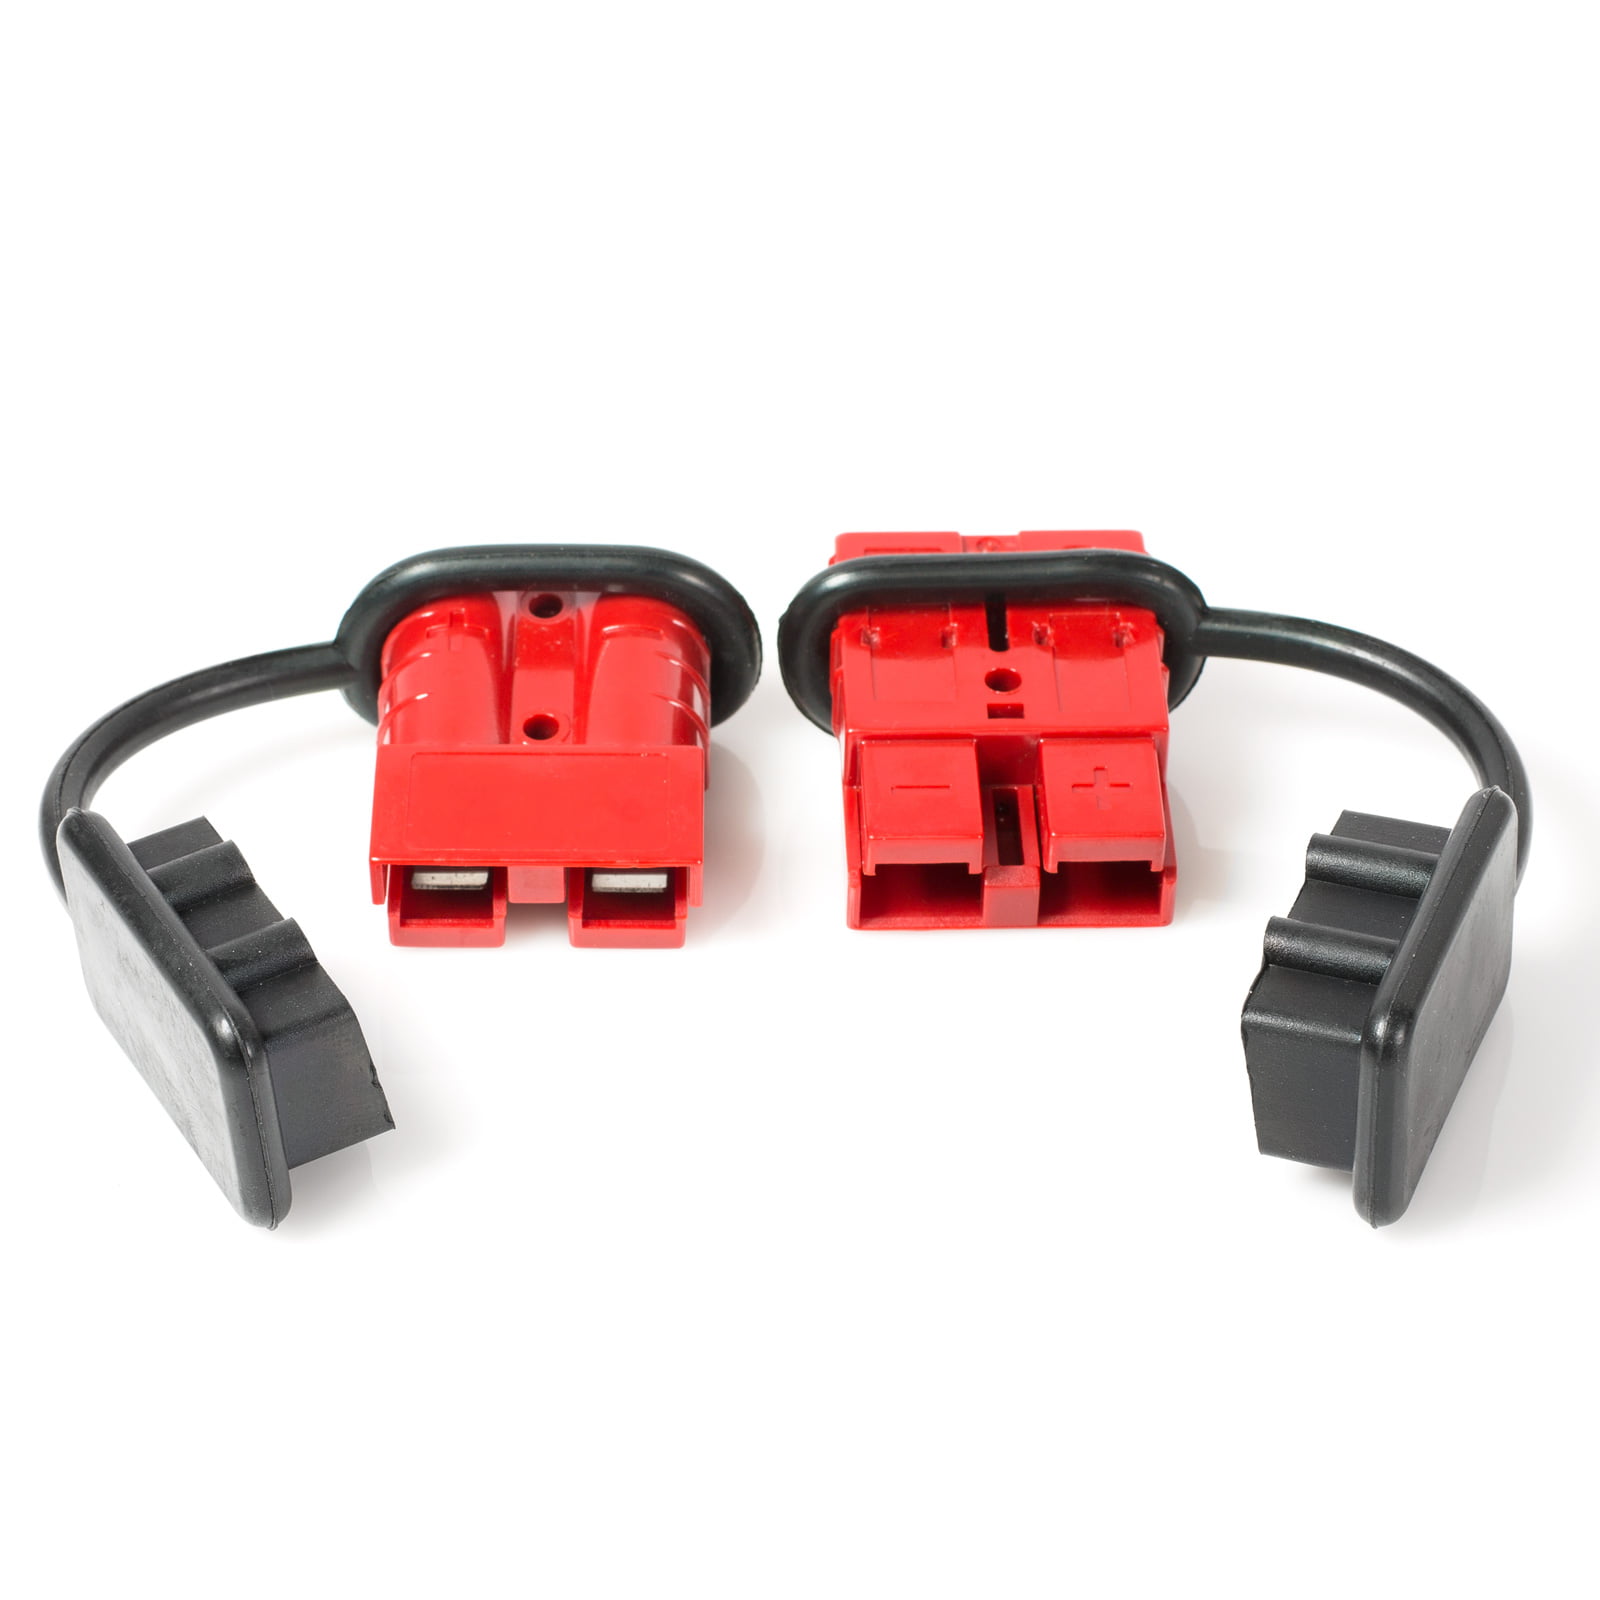 Battery Quick Connector Kit 50a 8awg Plug Connect Disconnect Winch Trailer 4pcs